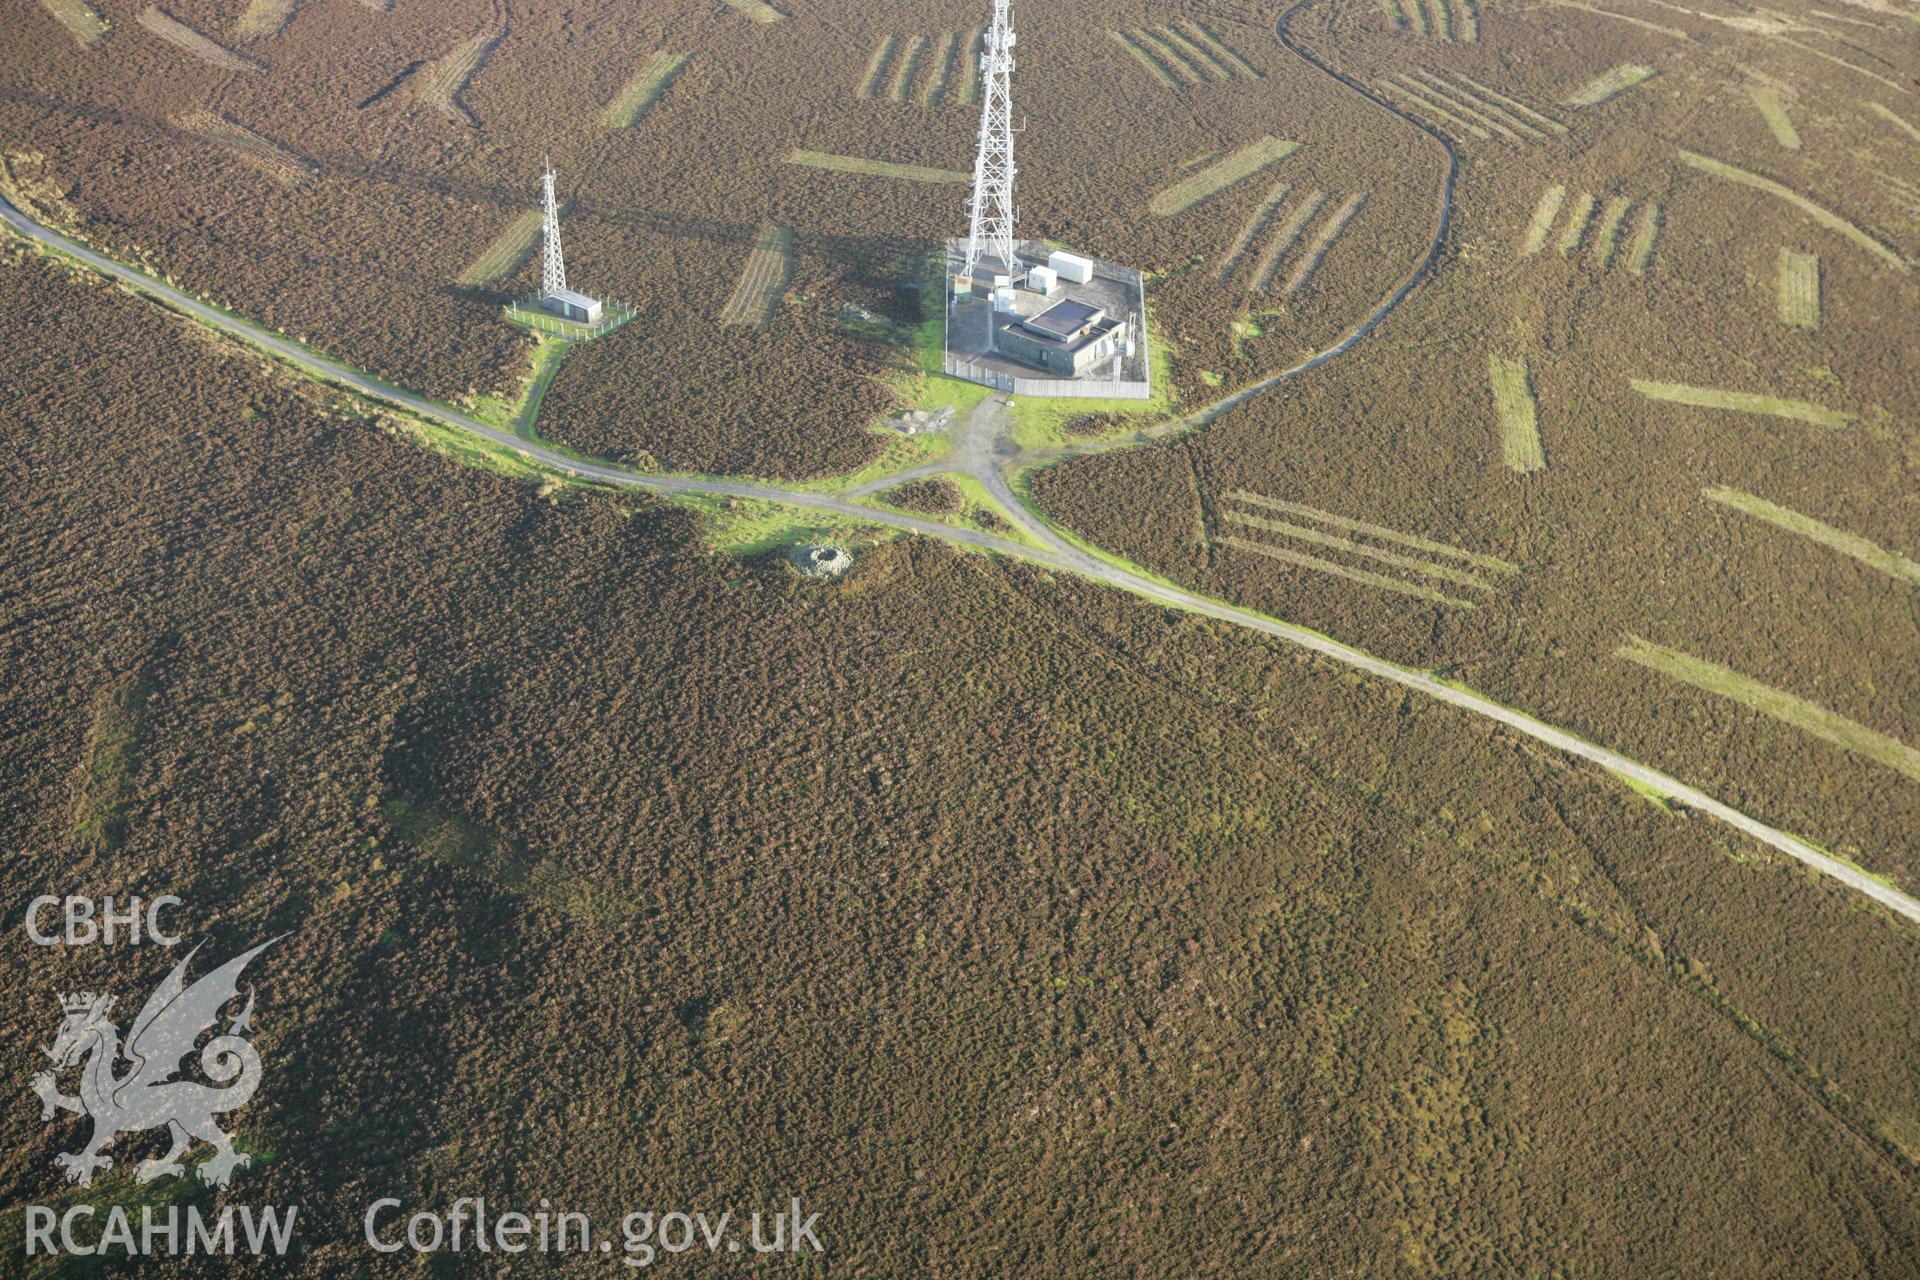 RCAHMW colour oblique aerial photograph of Cryn-y-Brain Cairn II and Wireless Station Cairn II. Taken on 10 December 2009 by Toby Driver